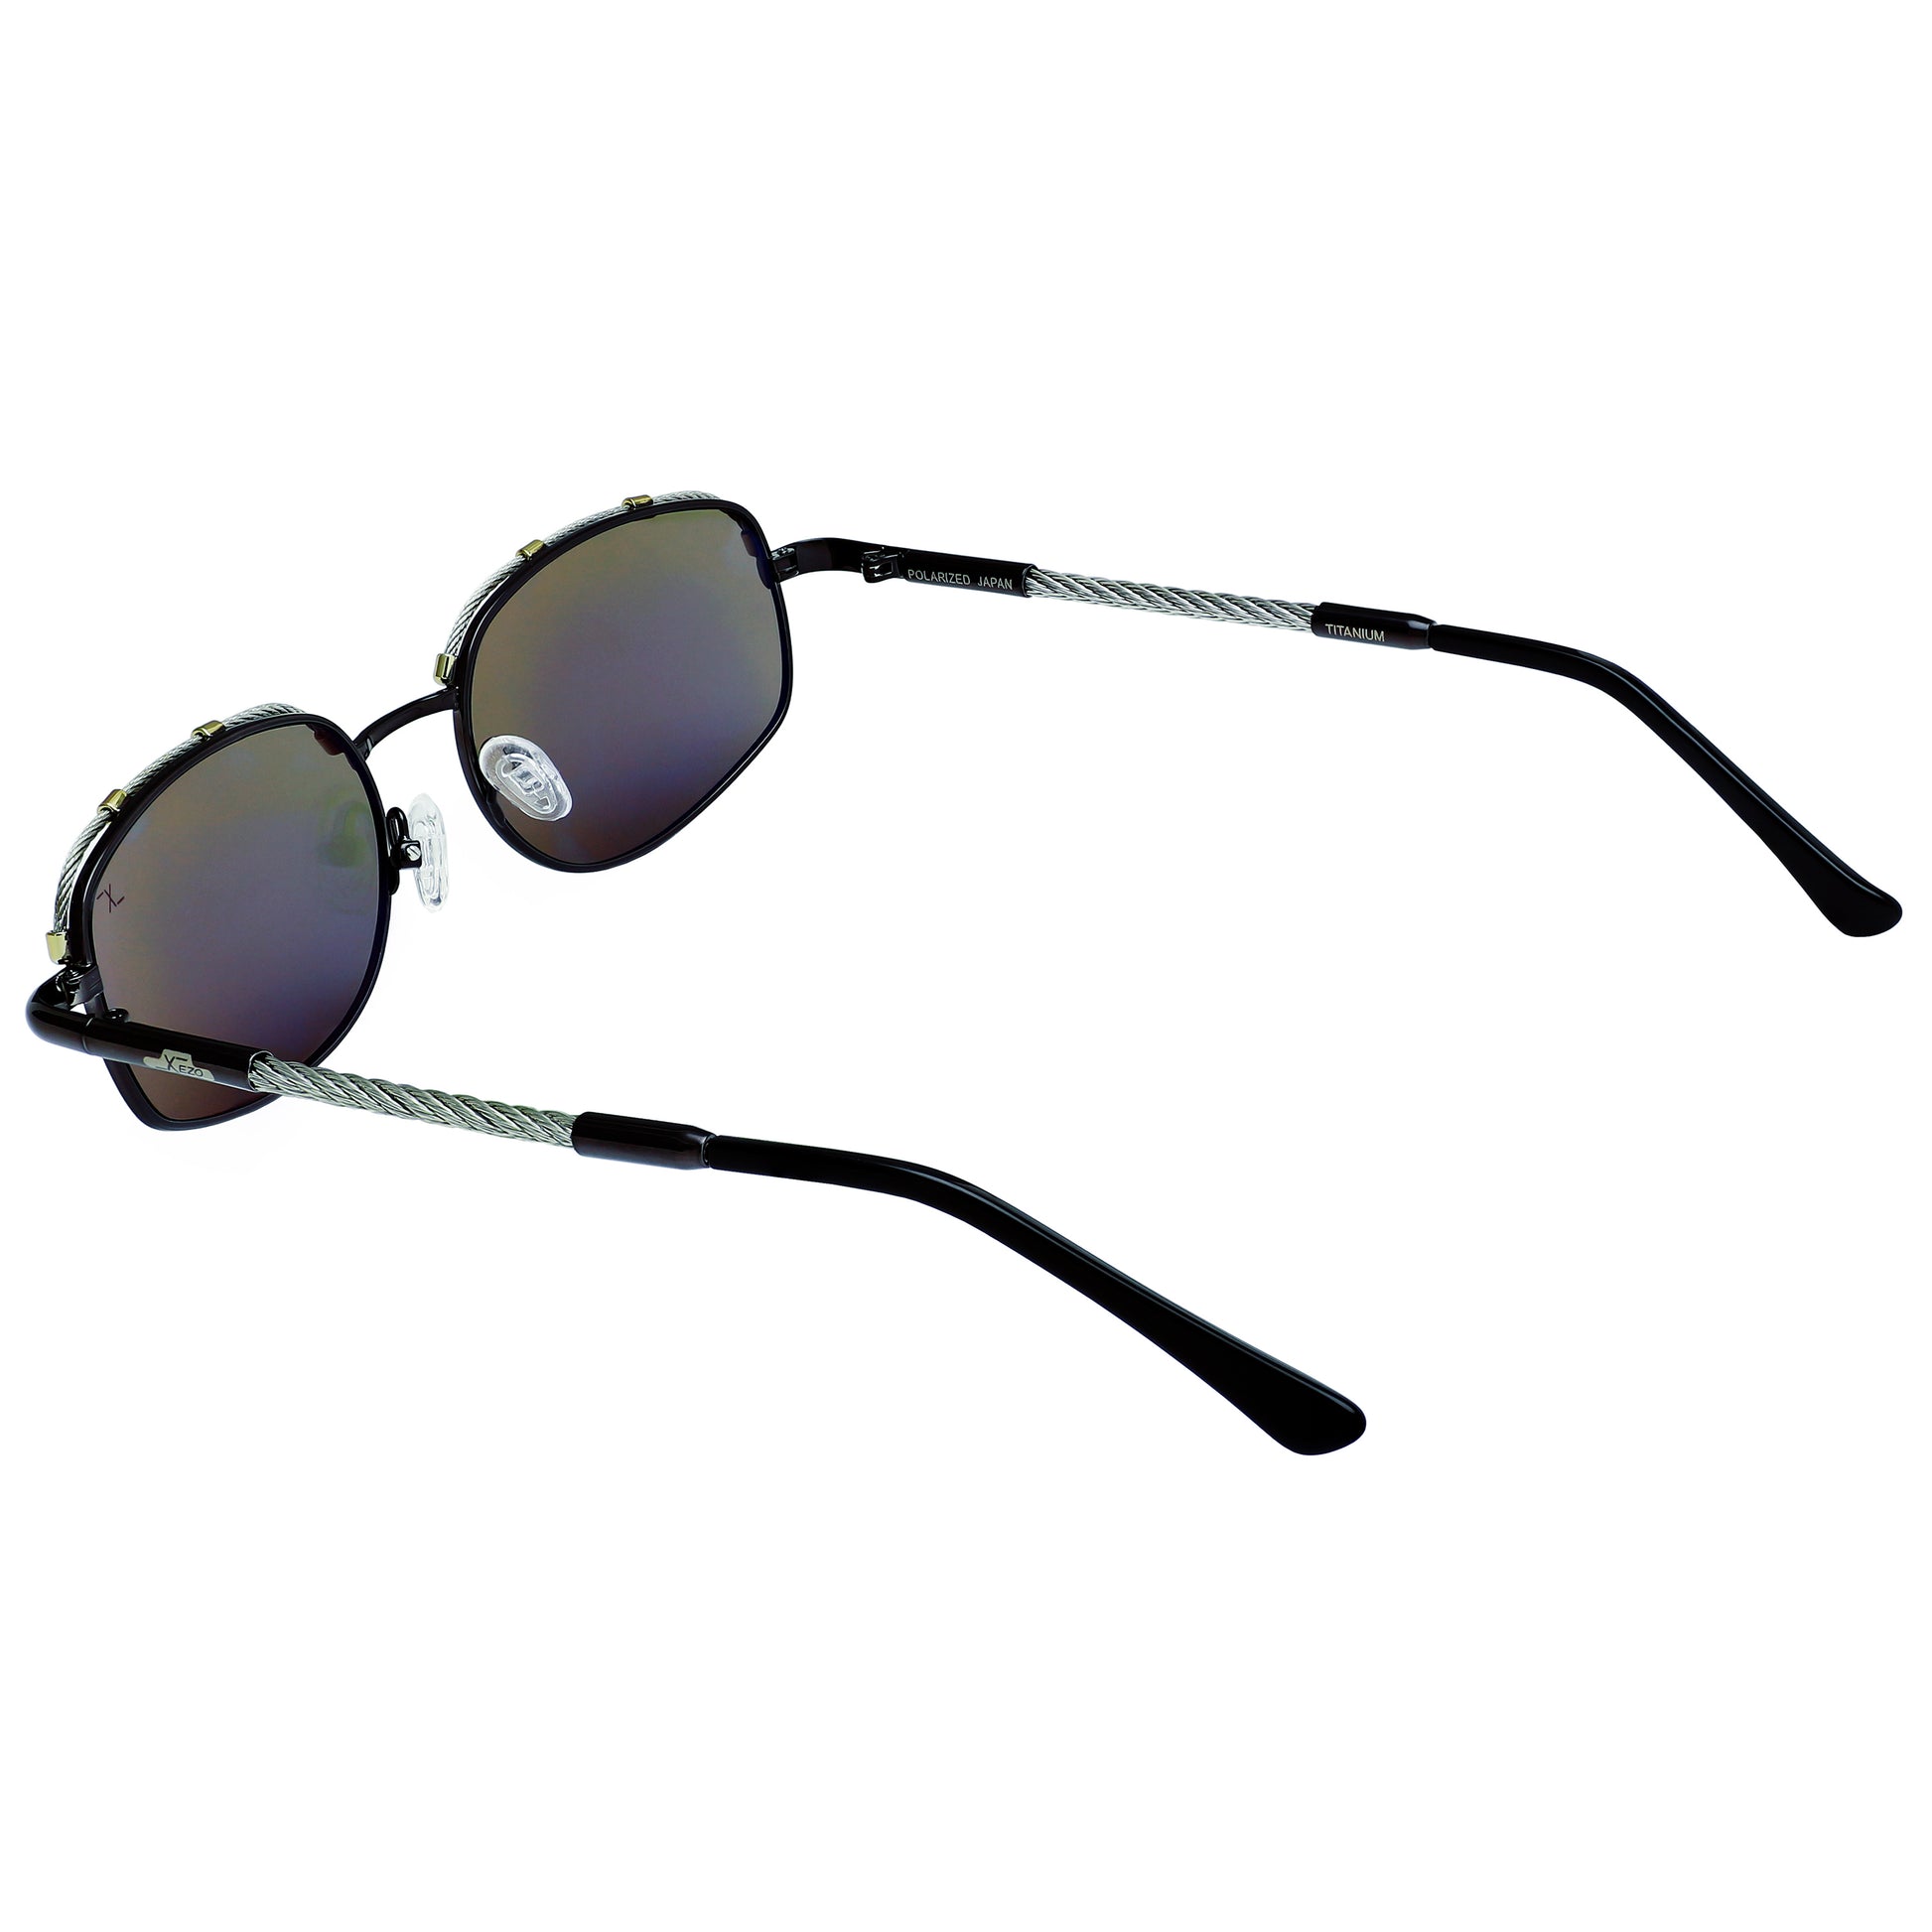 Xezo - Angled back view of a pair of Airman 2002 R sunglasses